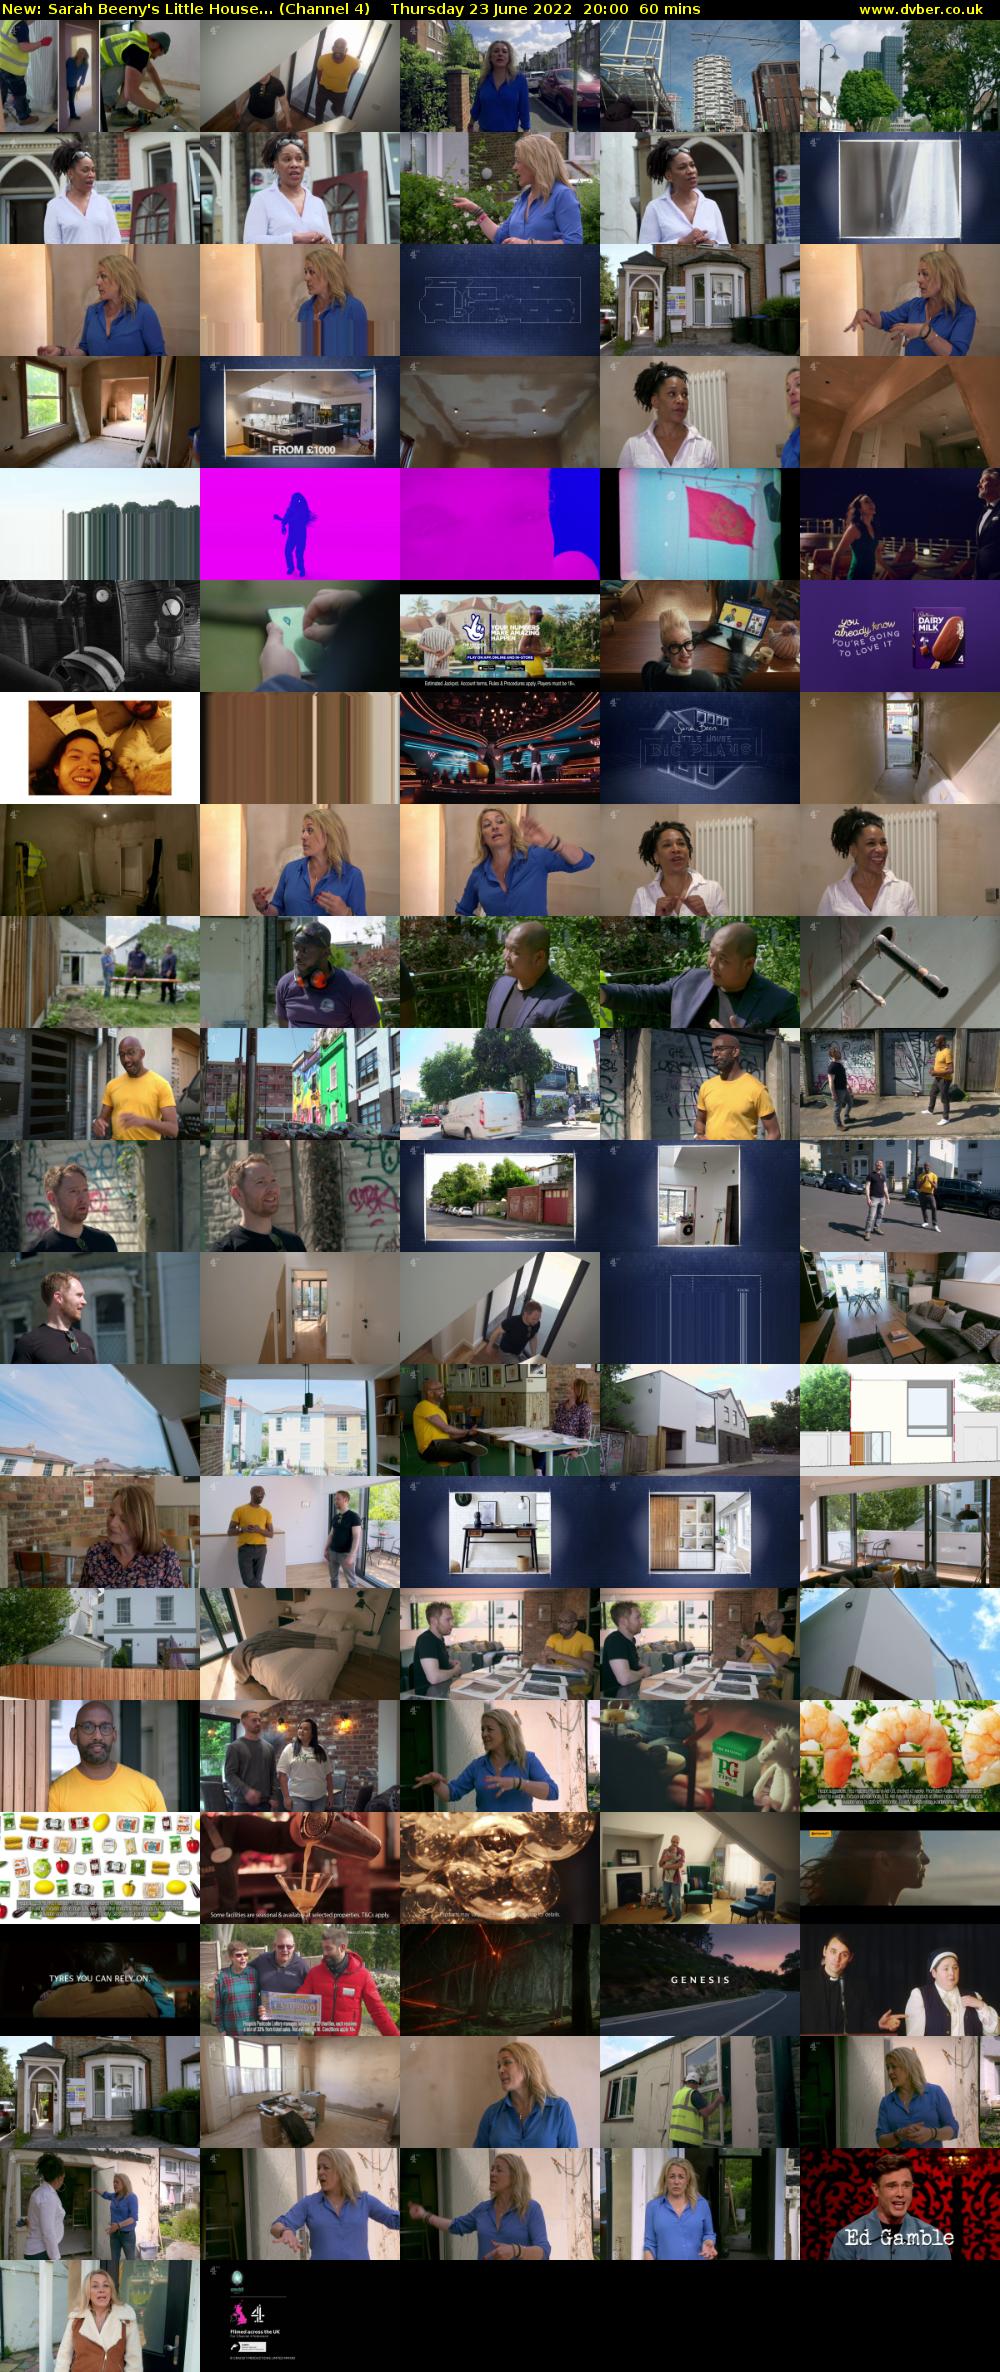 Sarah Beeny's Little House... (Channel 4) Thursday 23 June 2022 20:00 - 21:00